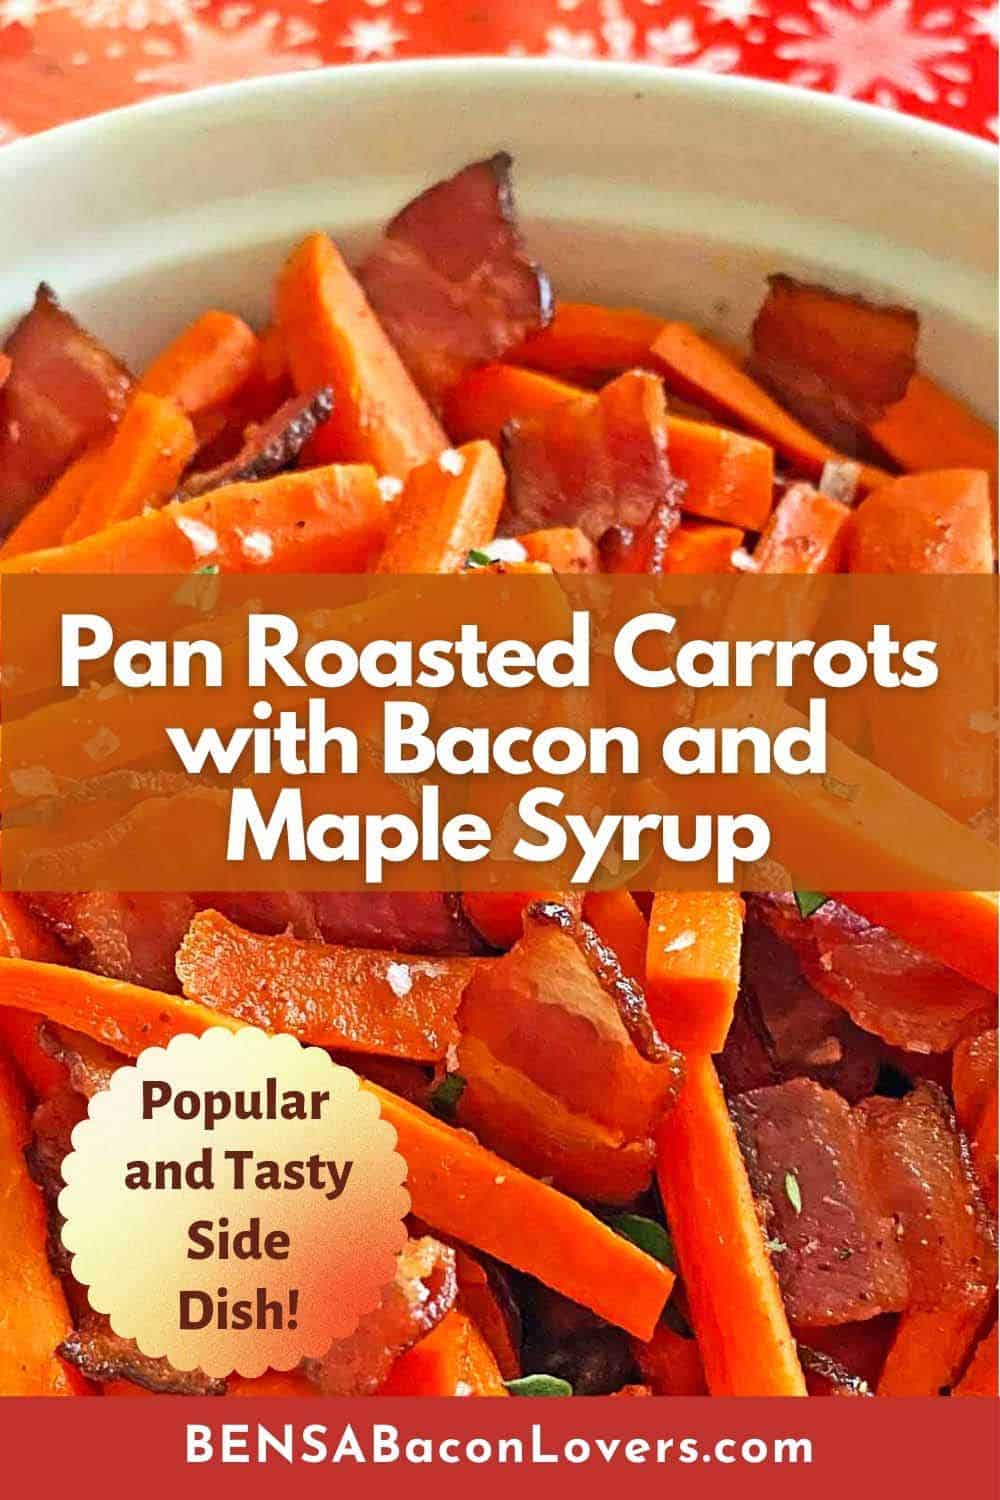 A Pinterest pin showing a close up of a white dish with carrots and bacon with maple syrup.